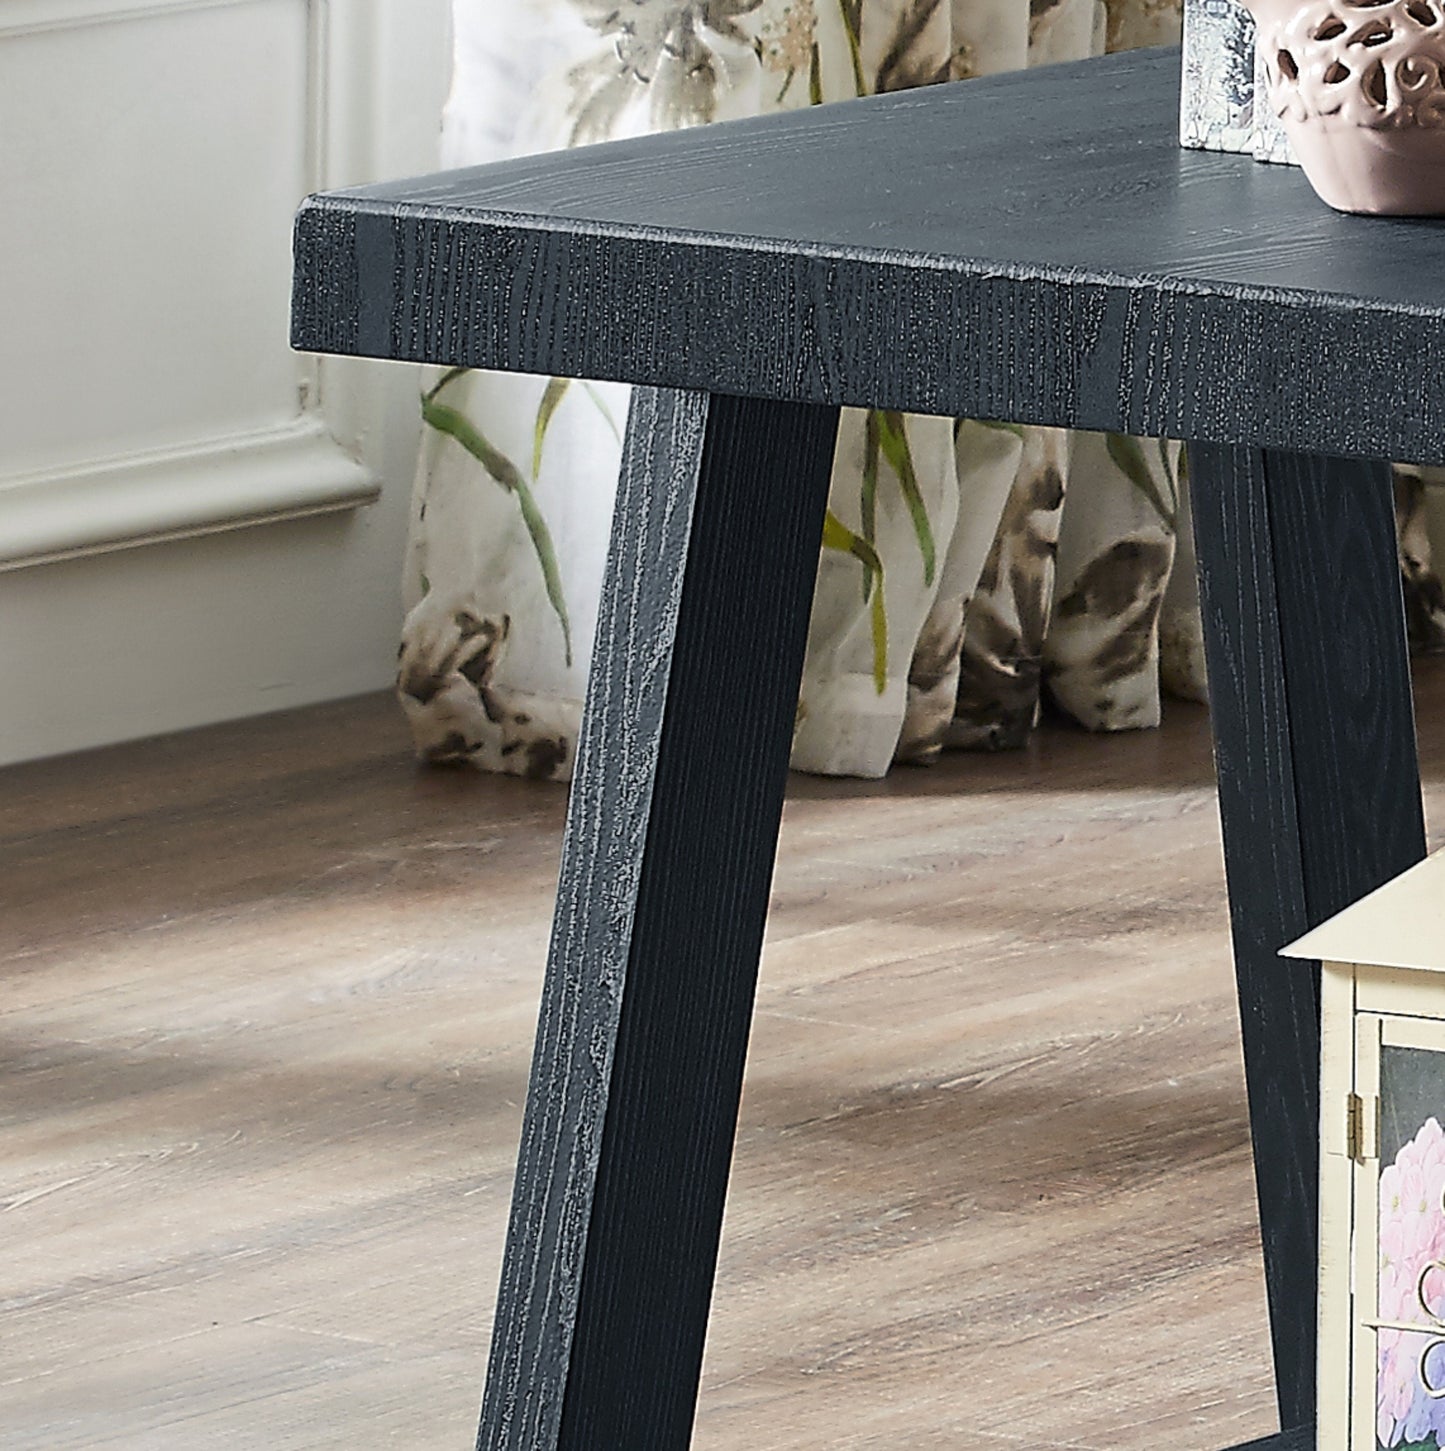 Athens Contemporary Replicated Wood Shelf End Table in Black Finish